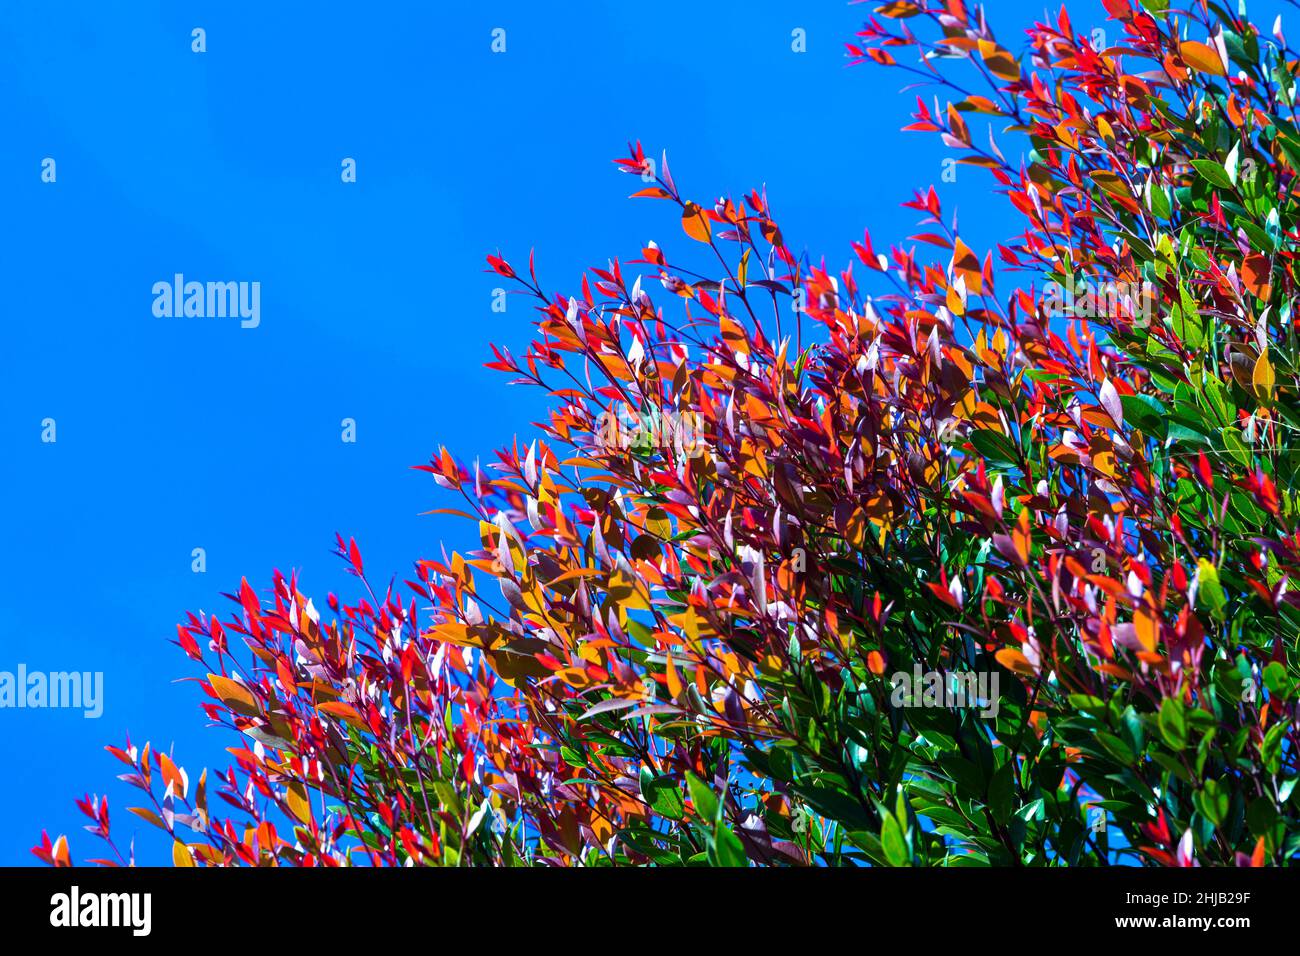 The beautiful colorful green red leaves of Christina tree (Syzygium Campanulatum) in a garden. The young leaves of Christina tree color are red, ang i Stock Photo